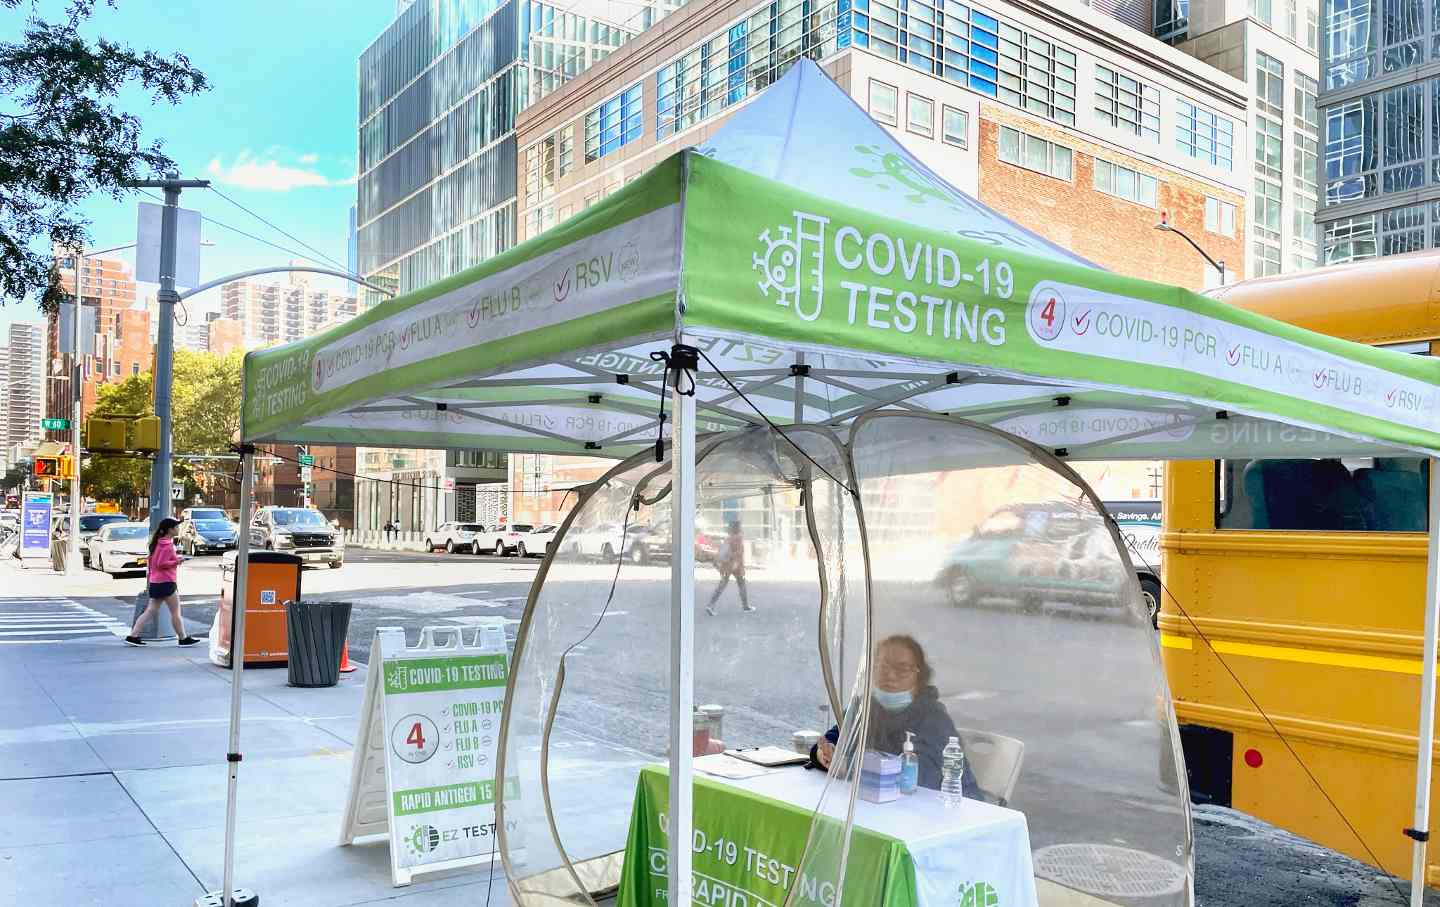 Convenient outdoor Covid-19 mobile testing site on the streets of New York City.